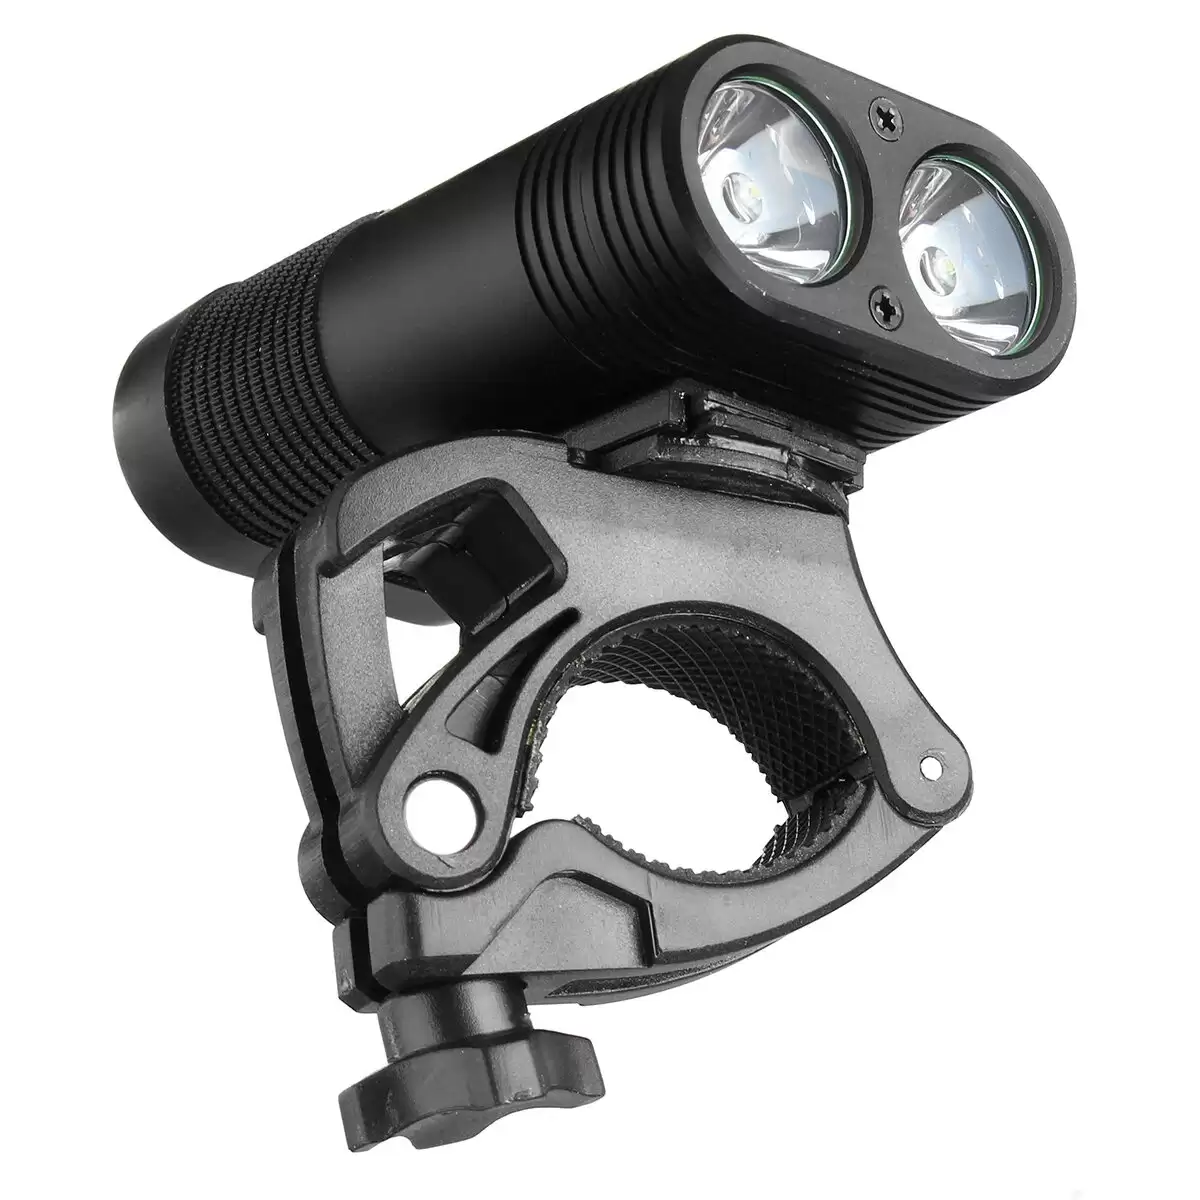 Order In Just $14.99 3000lm Double Led Rechargeable Bicycle Head Light Bike Type-c Lamp+rotating Mount Headlamp With This Coupon At Banggood